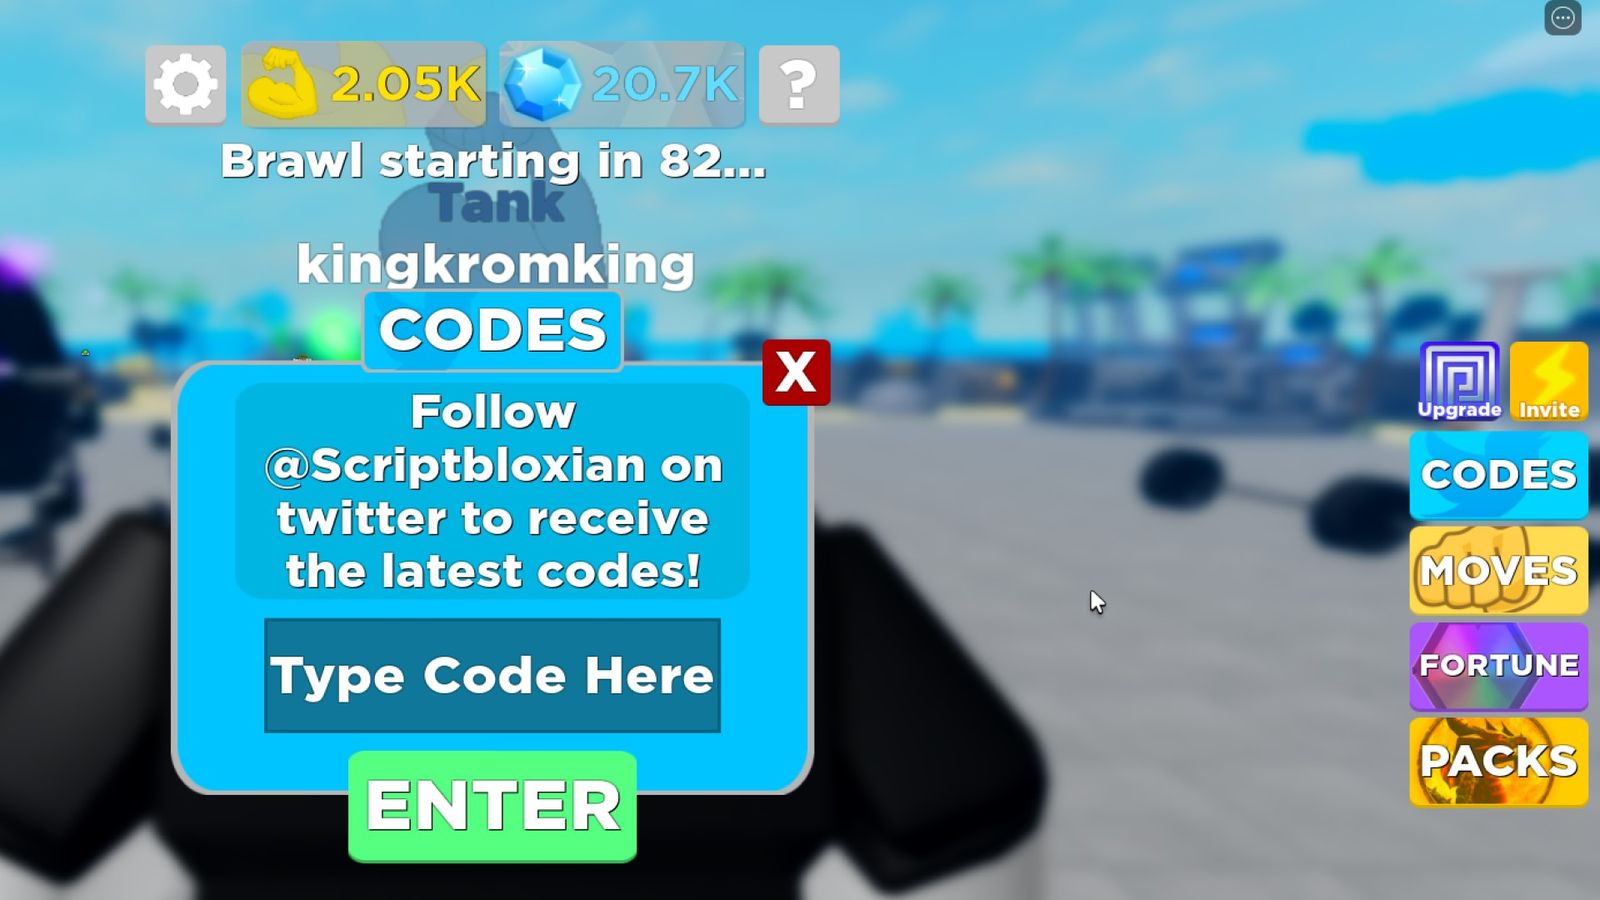 The Muscle Legends code redemption screen and menu